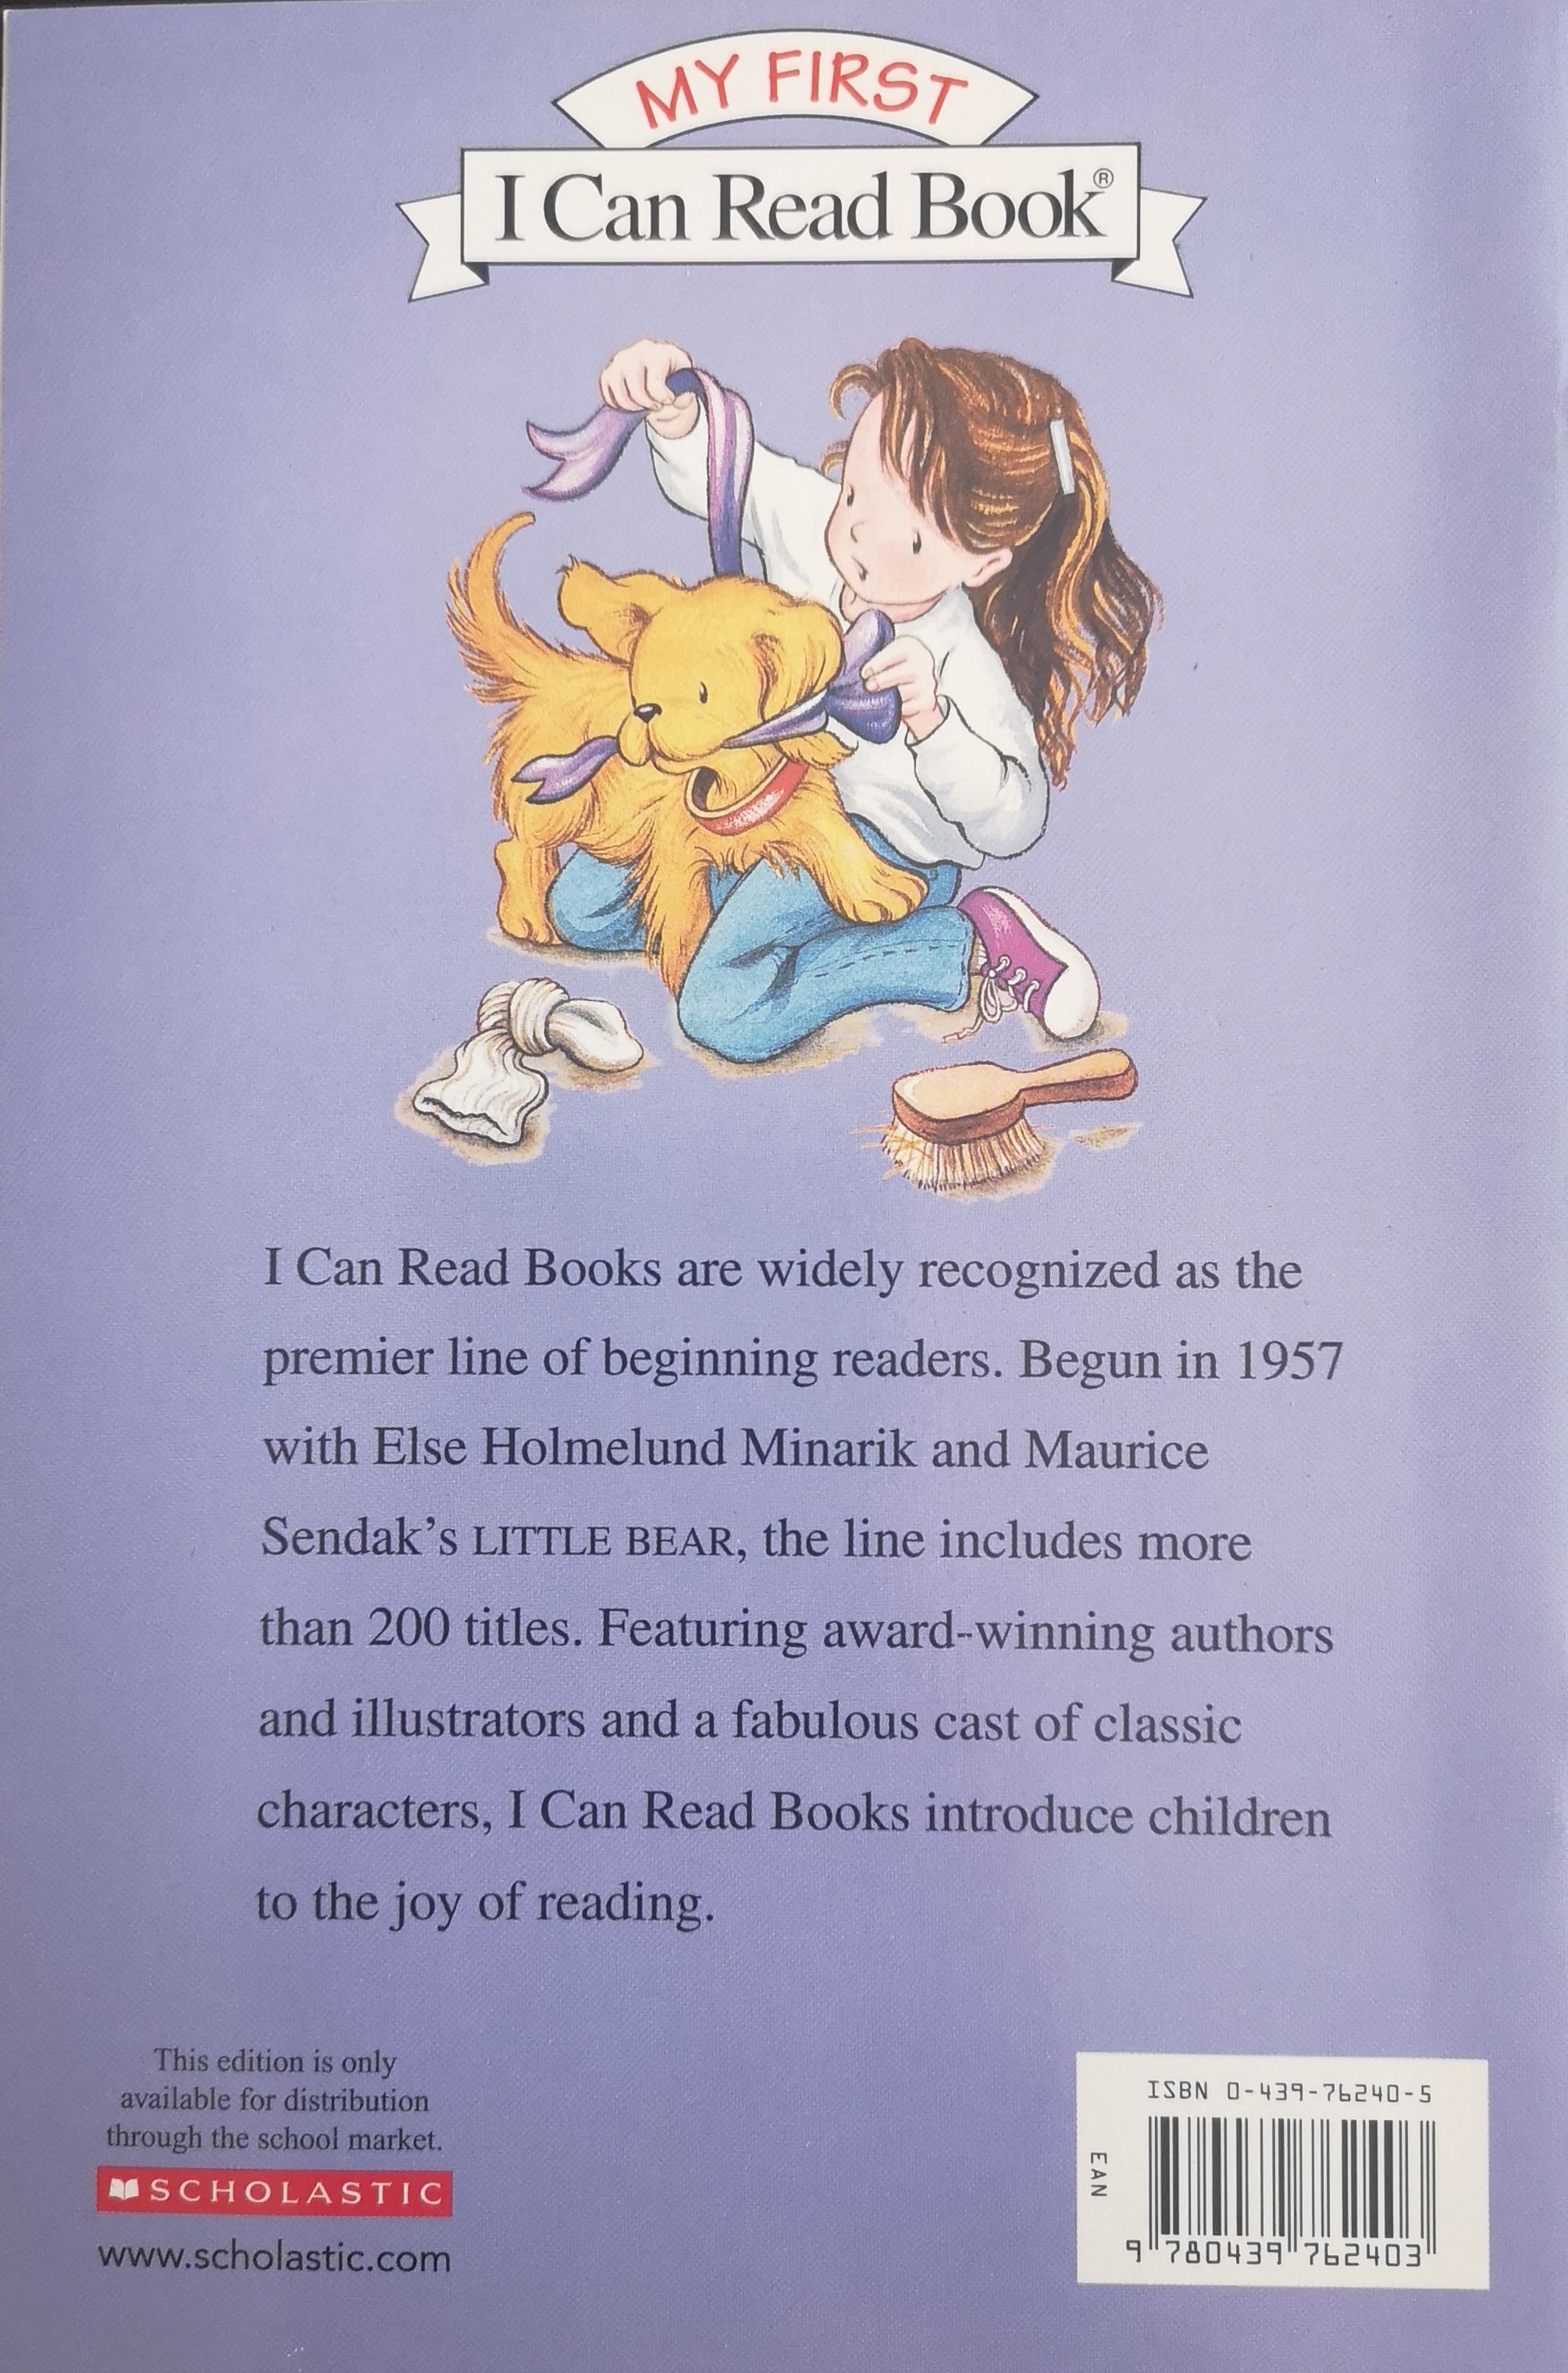 Biscuit Wins A Prize - Alyssa Satin Capucilli (Scholastic Inc. - Paperback) book collectible [Barcode 9780439762403] - Main Image 2